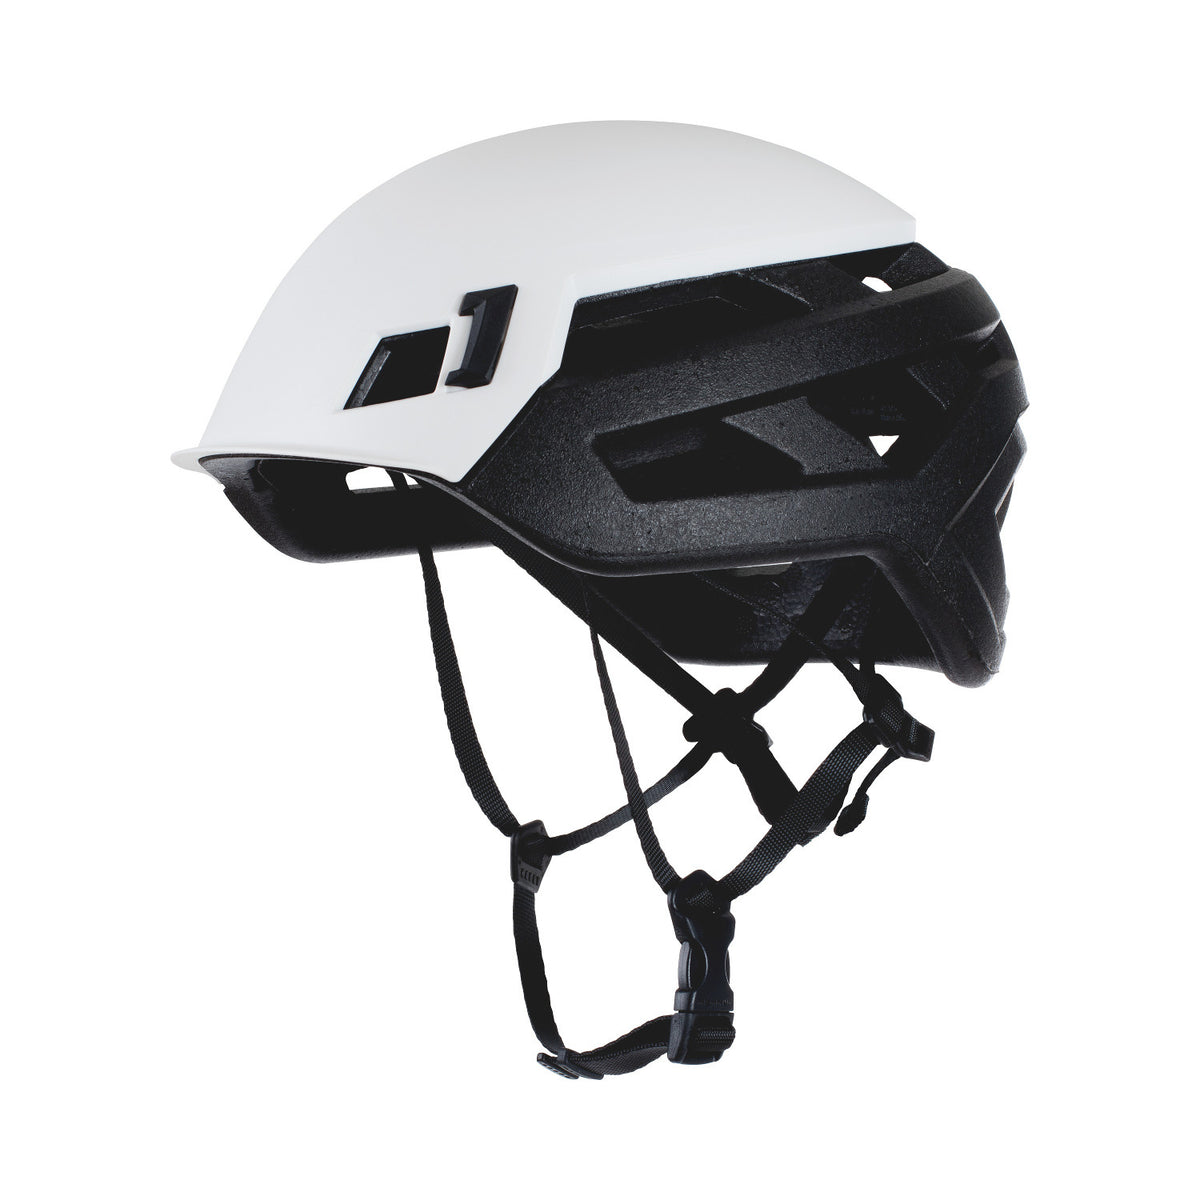 Mammut Wall Rider climbing helmet, inner side view in black and white colours